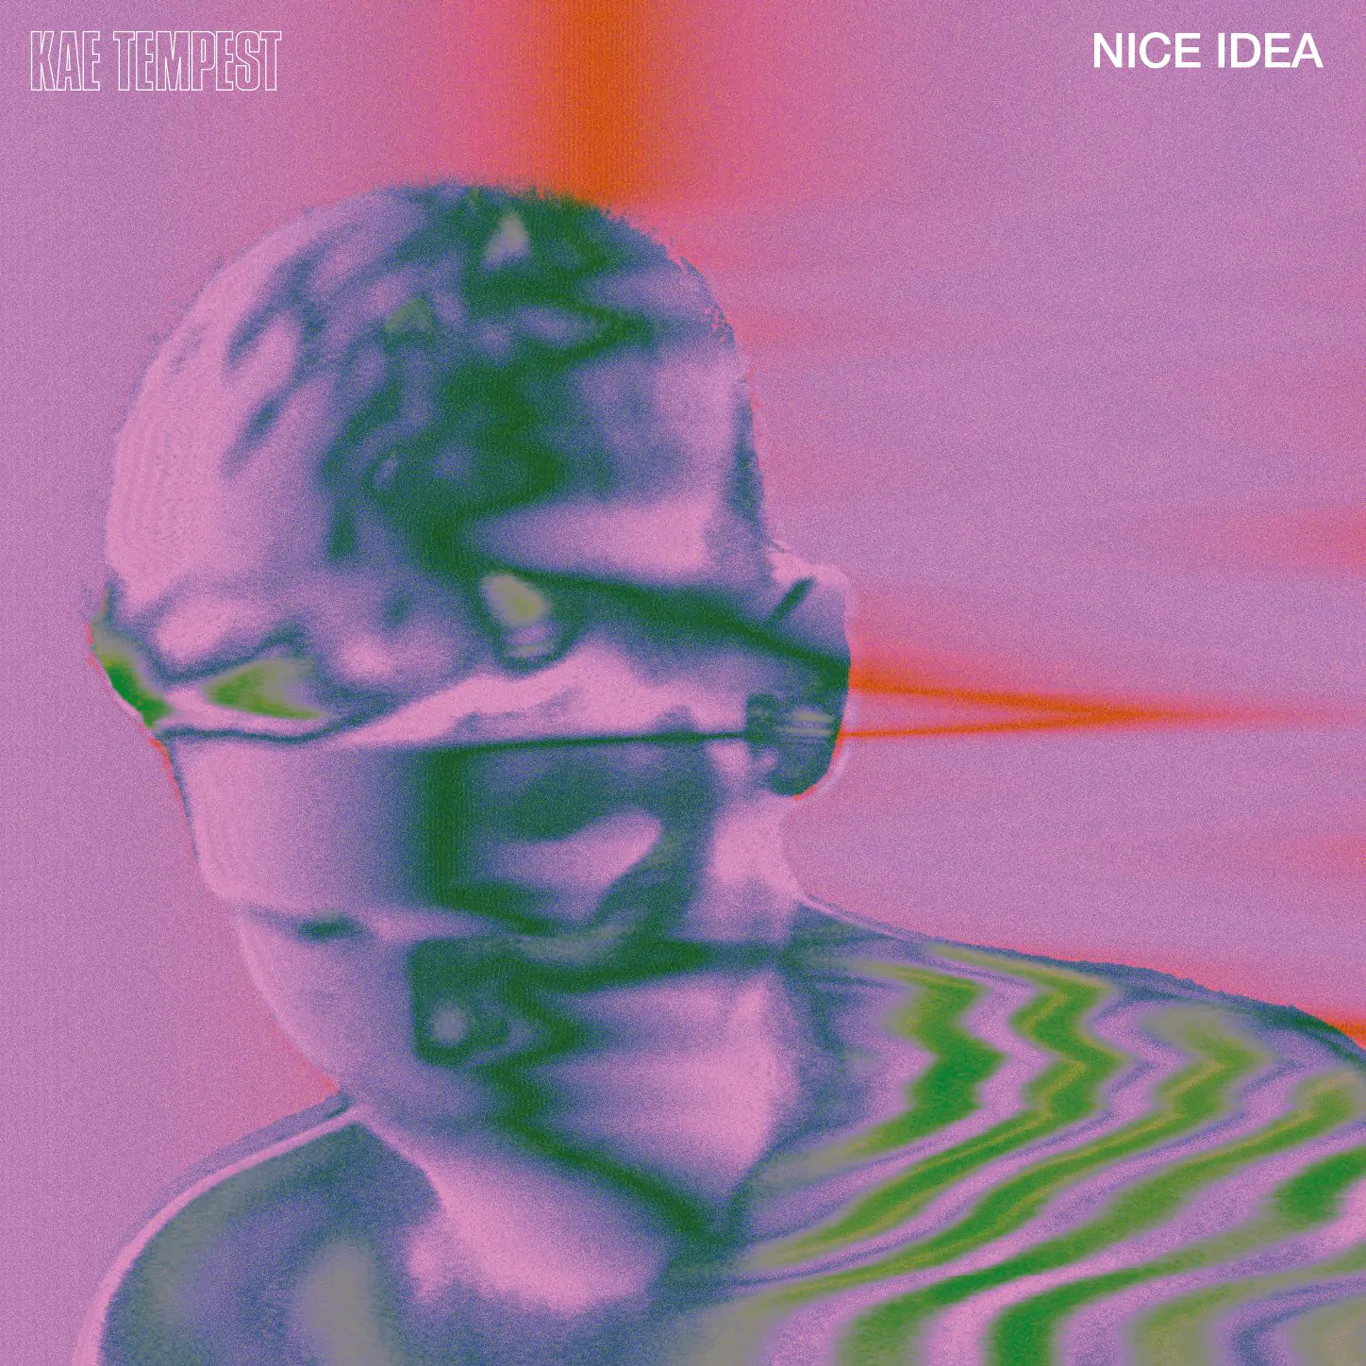 KAE TEMPEST announces 4 track EP entitled ‘Nice Idea’ exclusively for Record Store Day